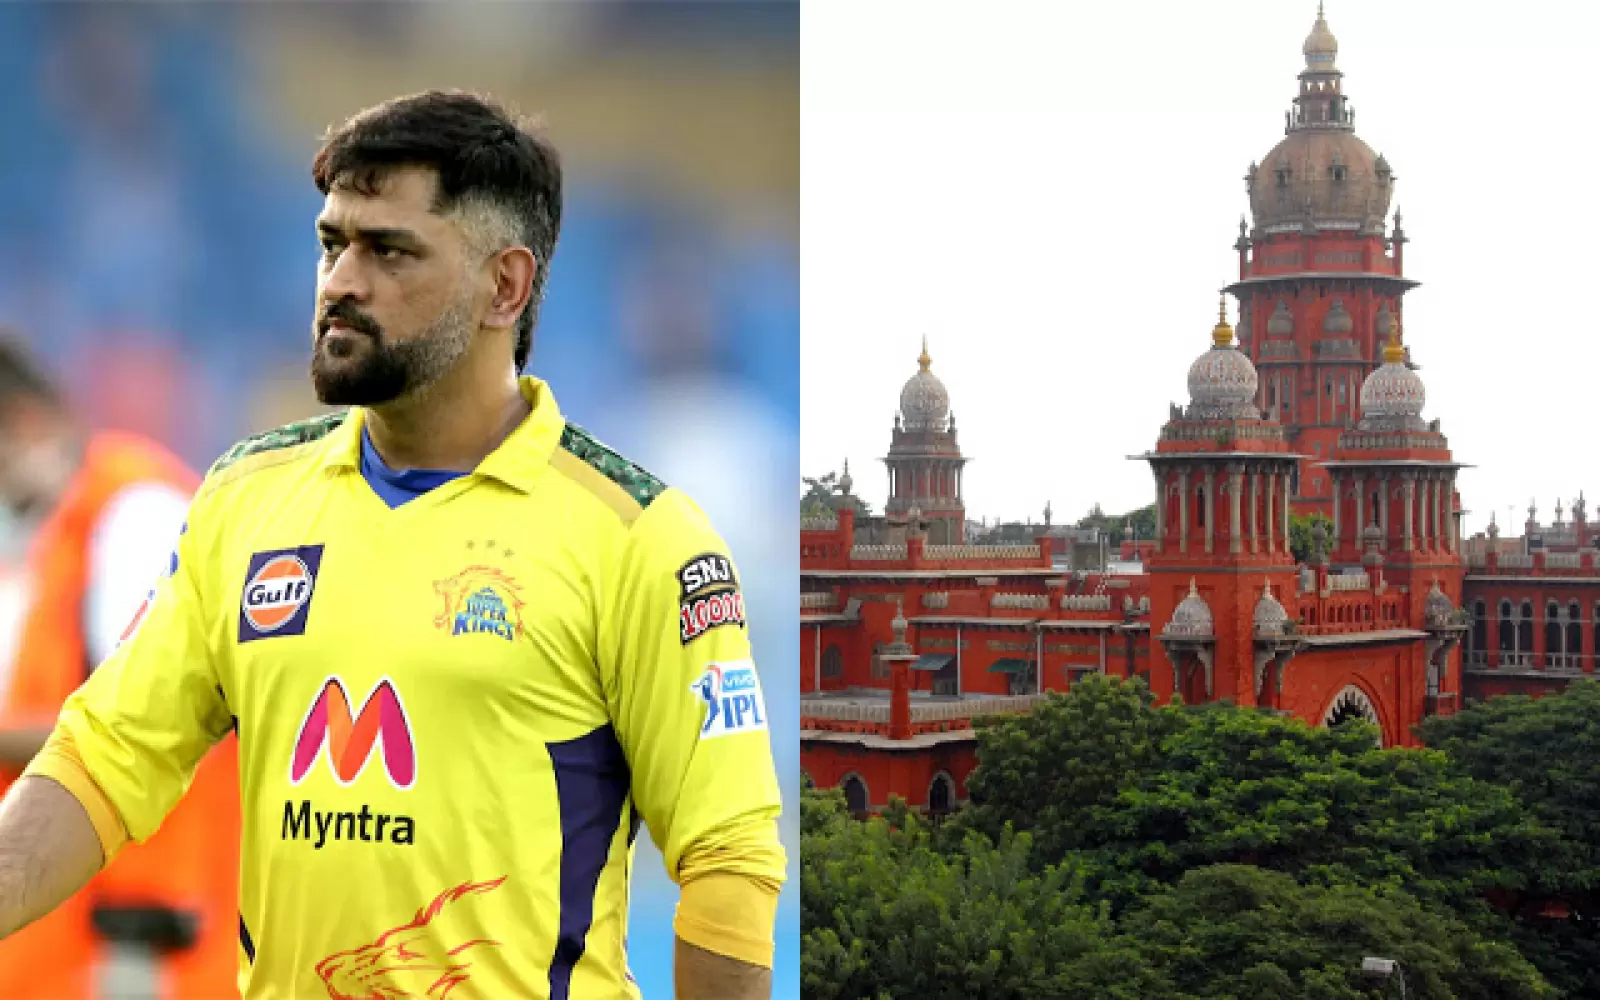 Retired IPS officer who accused Dhoni of match-fixing gets relief from Supreme Court, Madras High Court stays sentence